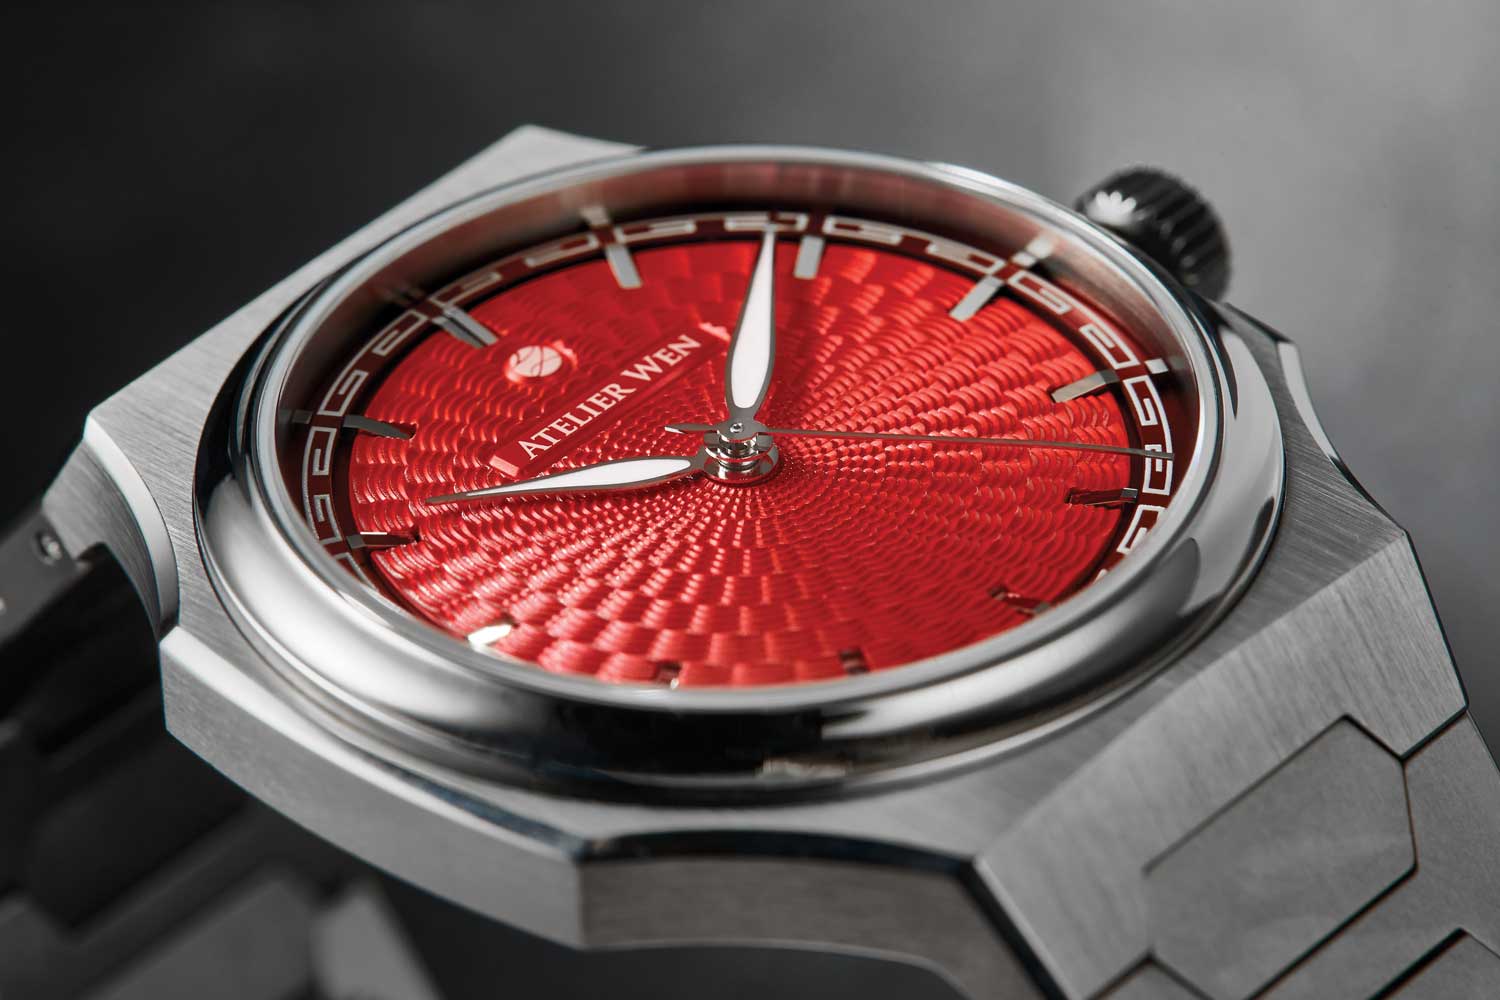 Produced in just 100 numbered pieces, Atelier Wen × Revolution Perception – Xi features the signature dial in eye-catching fiery red